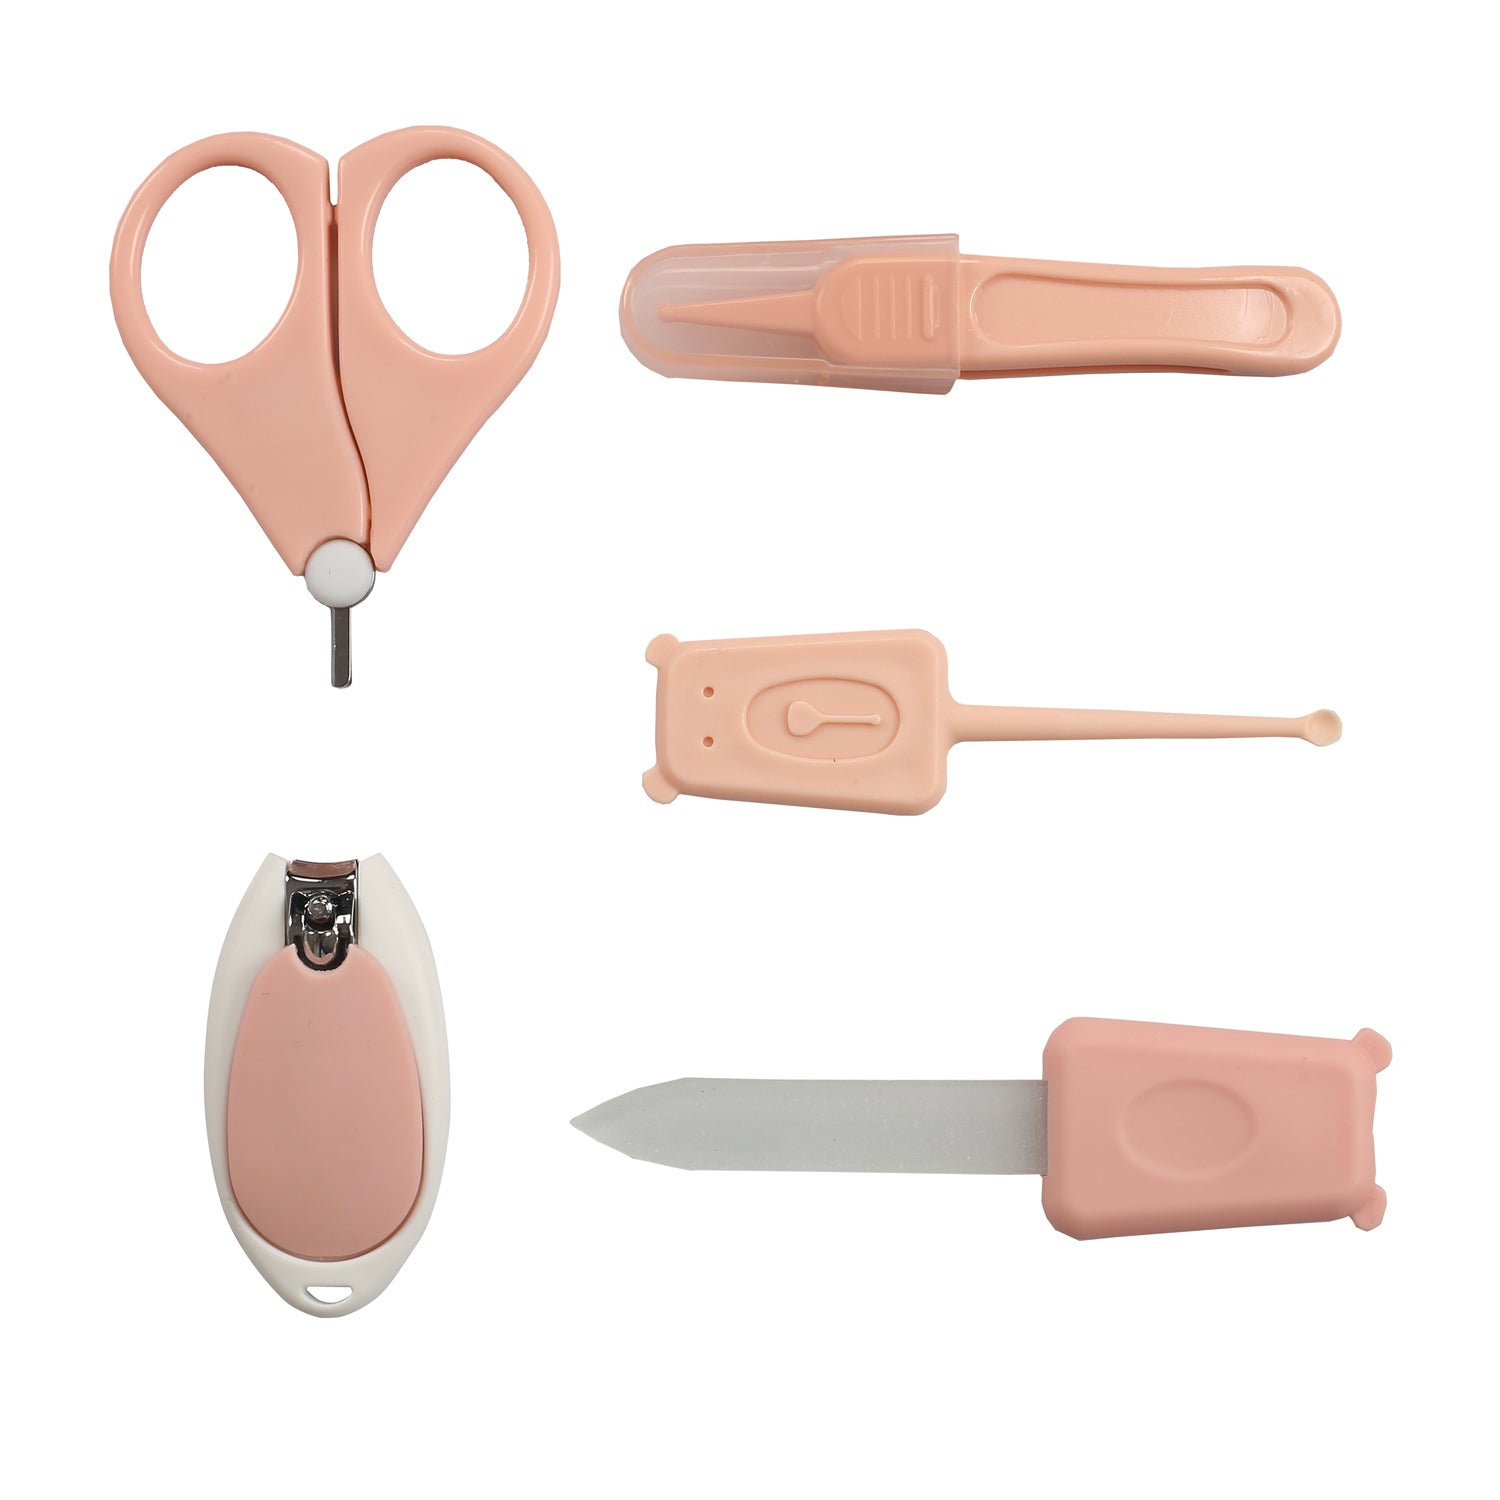 Peach Grooming Kit of 5 Pcs with a Nail Clipper